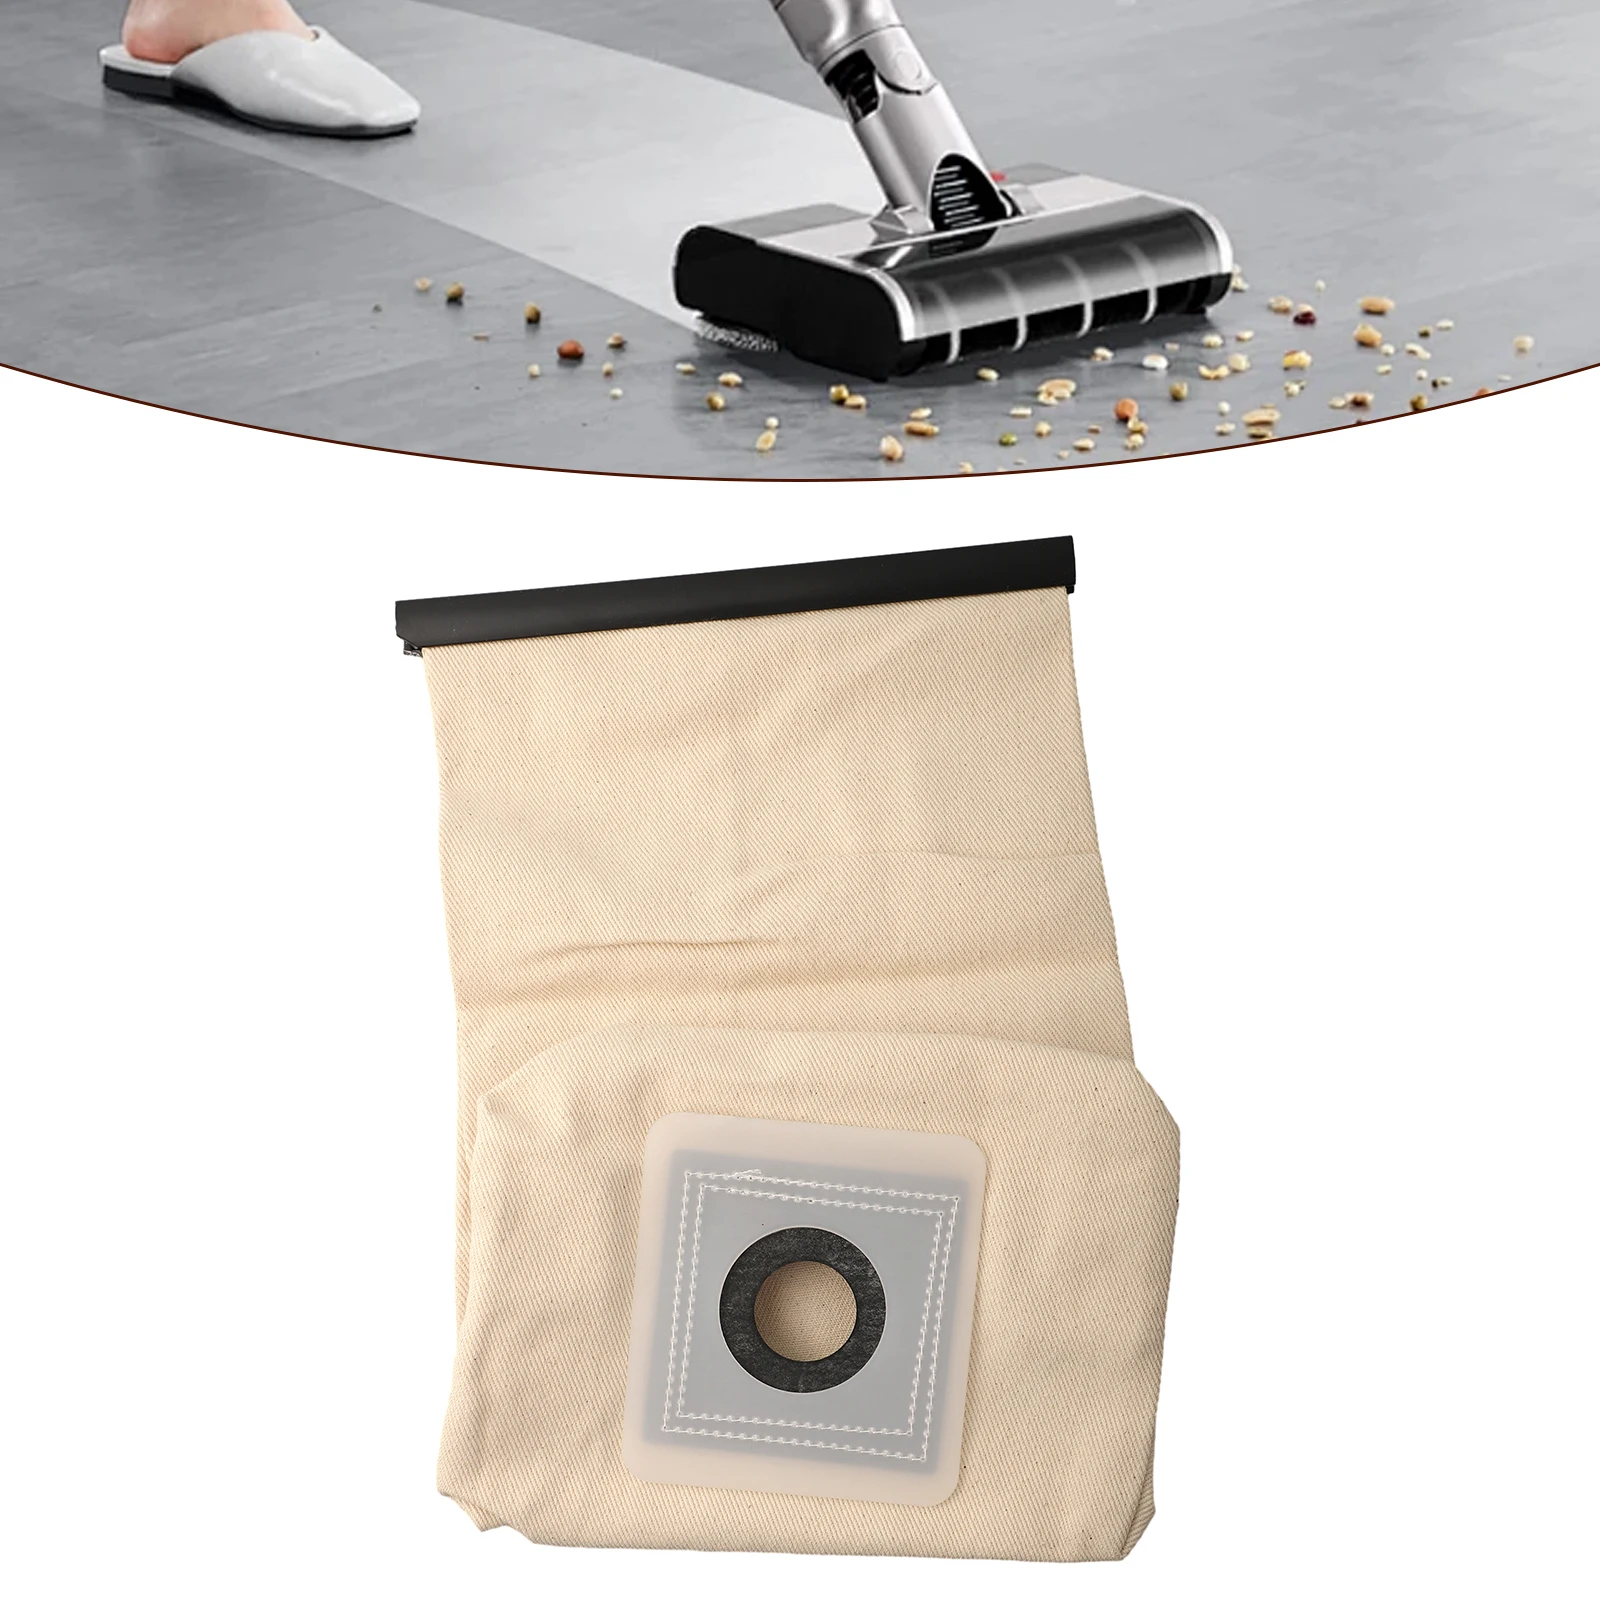 Vacuum Bags Dust Bag Reusable 95332110 9.533-211.0 Cleaning Tool For Hoover Filter Non-woven Dust Bag For Karcher sofa gap duster detachable brush for dust non woven dust brush for sofa bed furniture bottom household dust duster cleaning